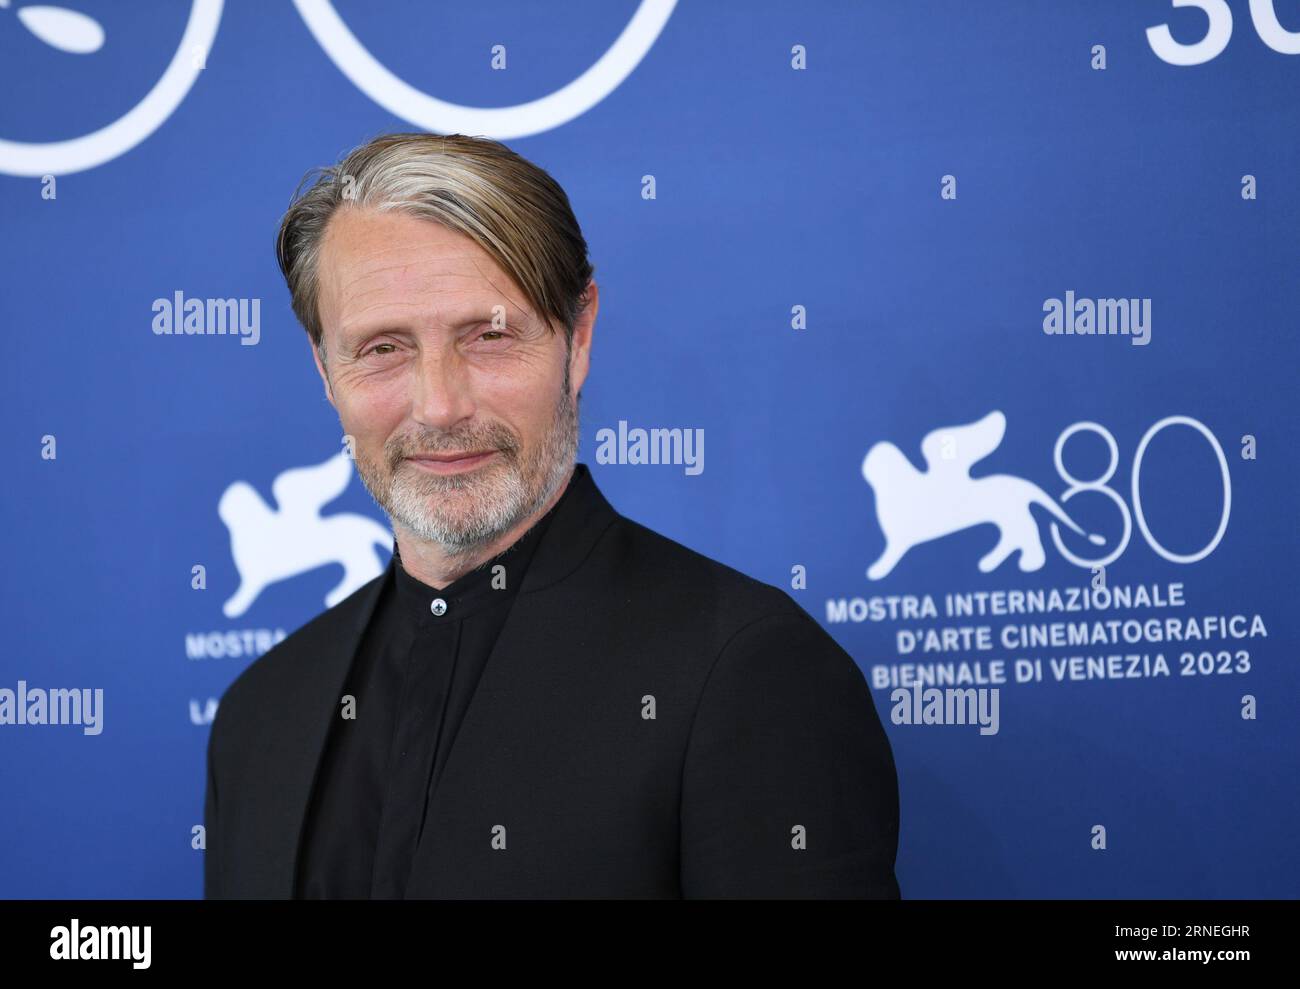 Venice, Italy. 1st Sep, 2023. Actor Mads Mikkelsen attends a photocall for the film 'Bastarden (The Promised Land)' during the 80th Venice International Film Festival in Venice, Italy, Sept. 1, 2023. The film will compete for the prestigious Golden Lion prize. Credit: Jin Mamengni/Xinhua/Alamy Live News Stock Photo